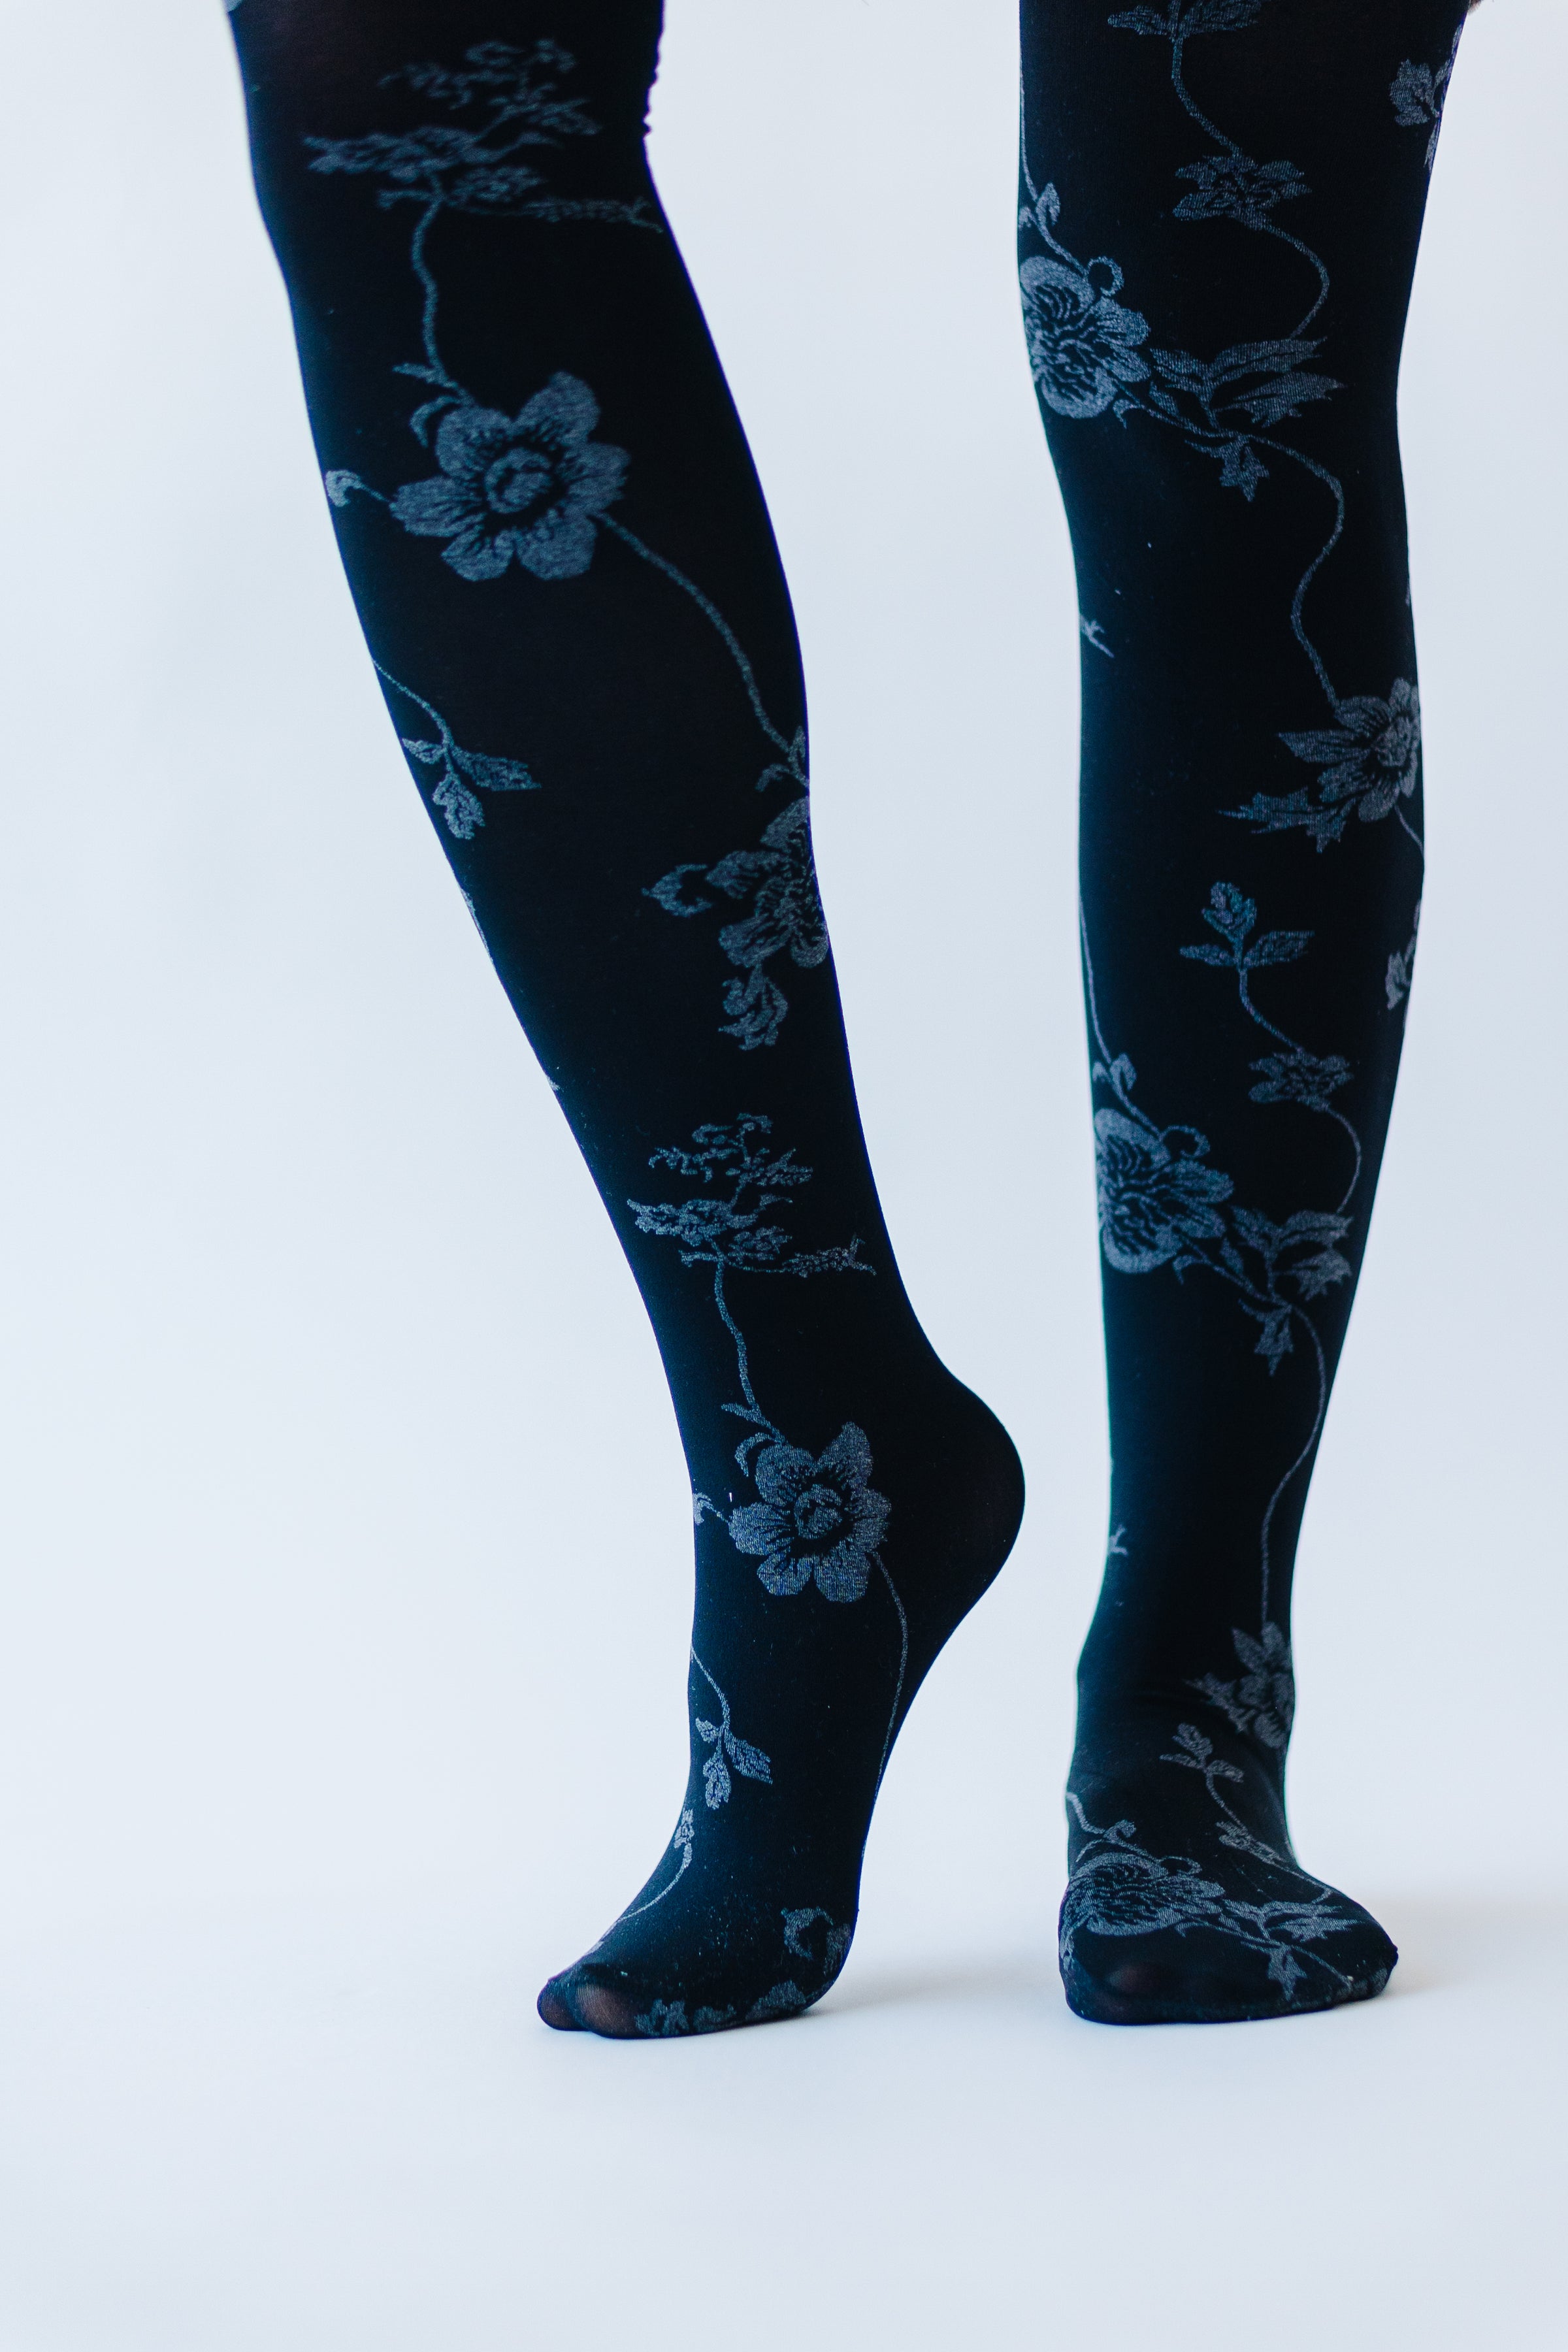 Buy Black Flower Women Jeans Online In India At Discounted Prices